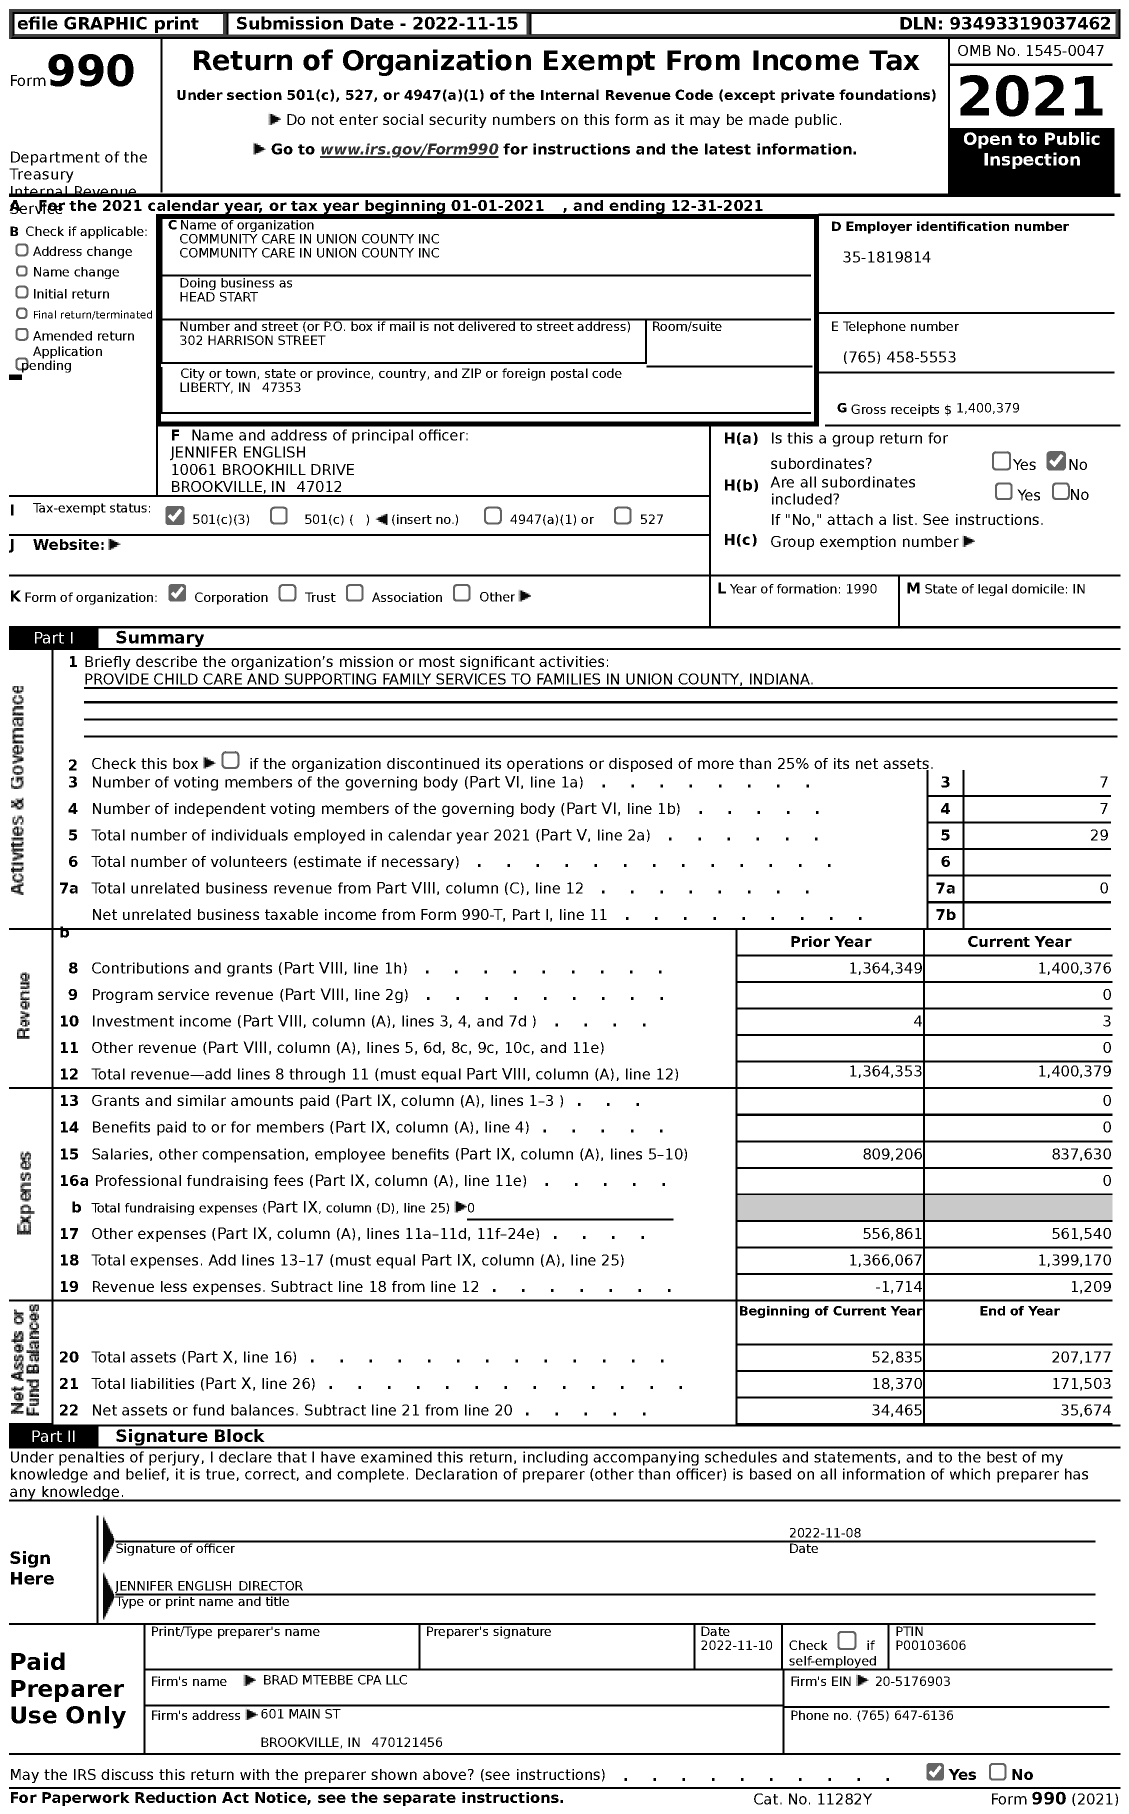 Image of first page of 2021 Form 990 for Head Start / Community Care in Union County Inc Community Care in Union County Inc